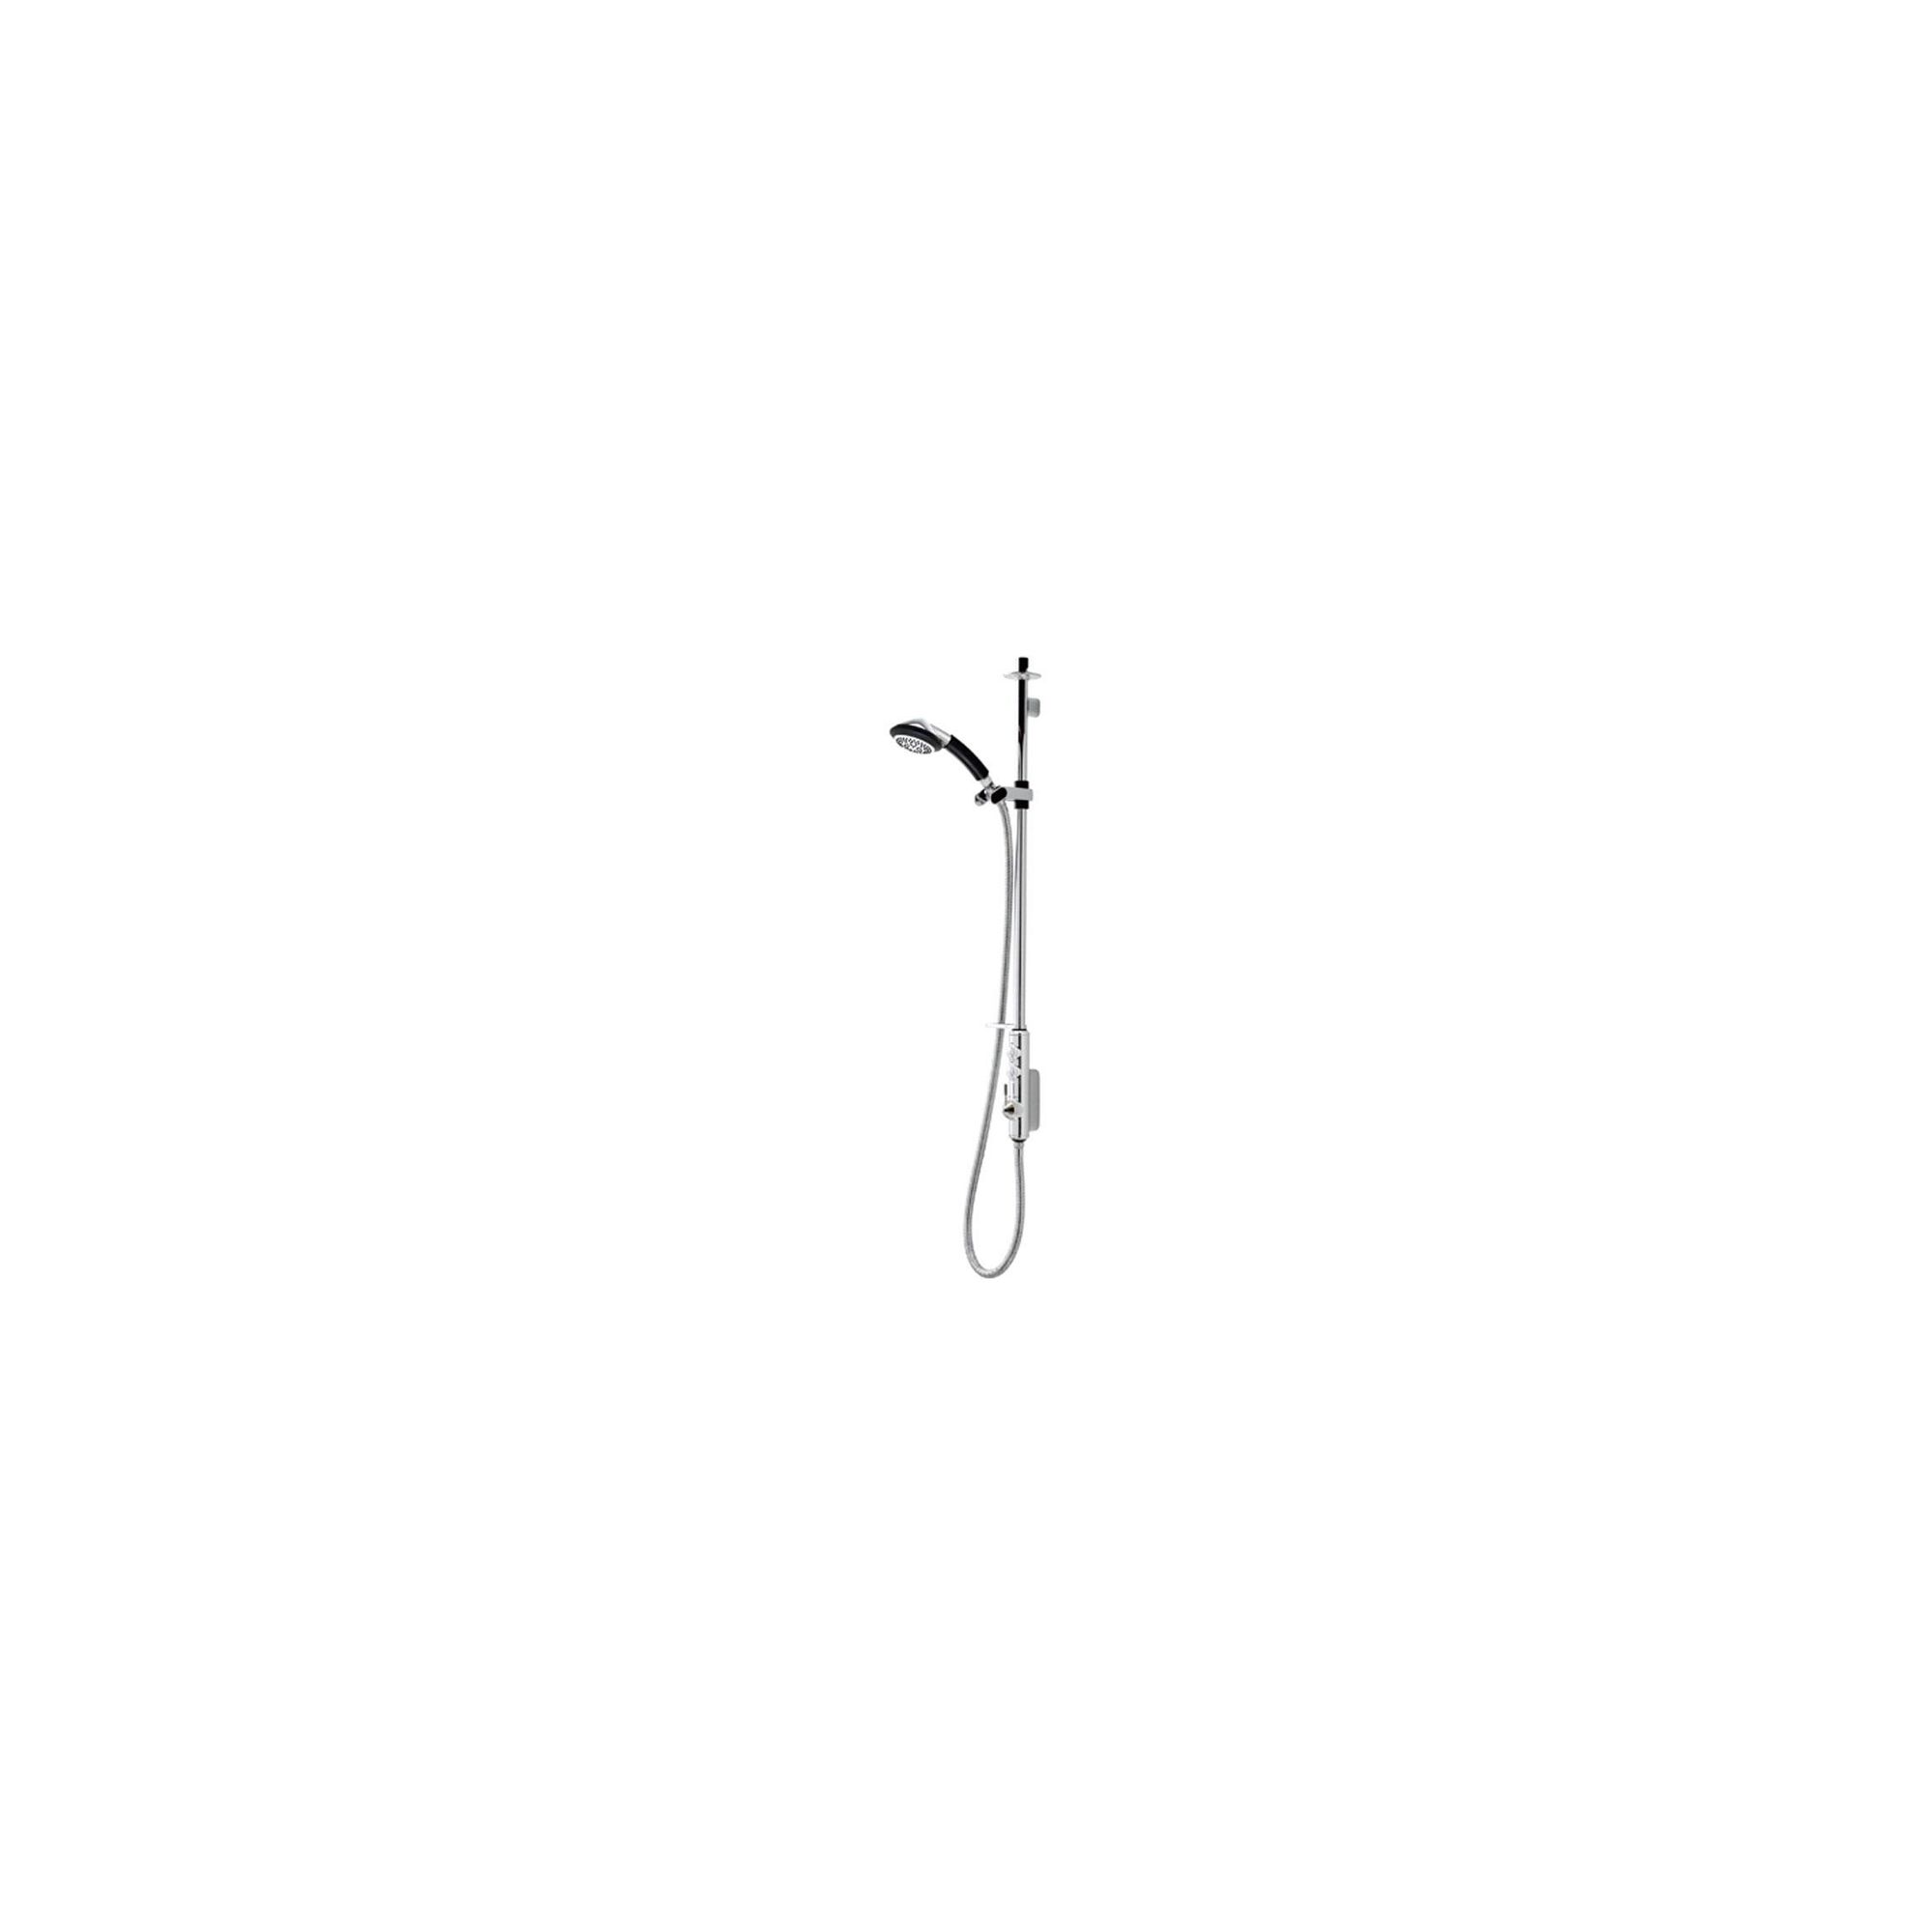 Aqualisa Axis Digital Exposed Shower with Adjustable Head Kit at Tescos Direct